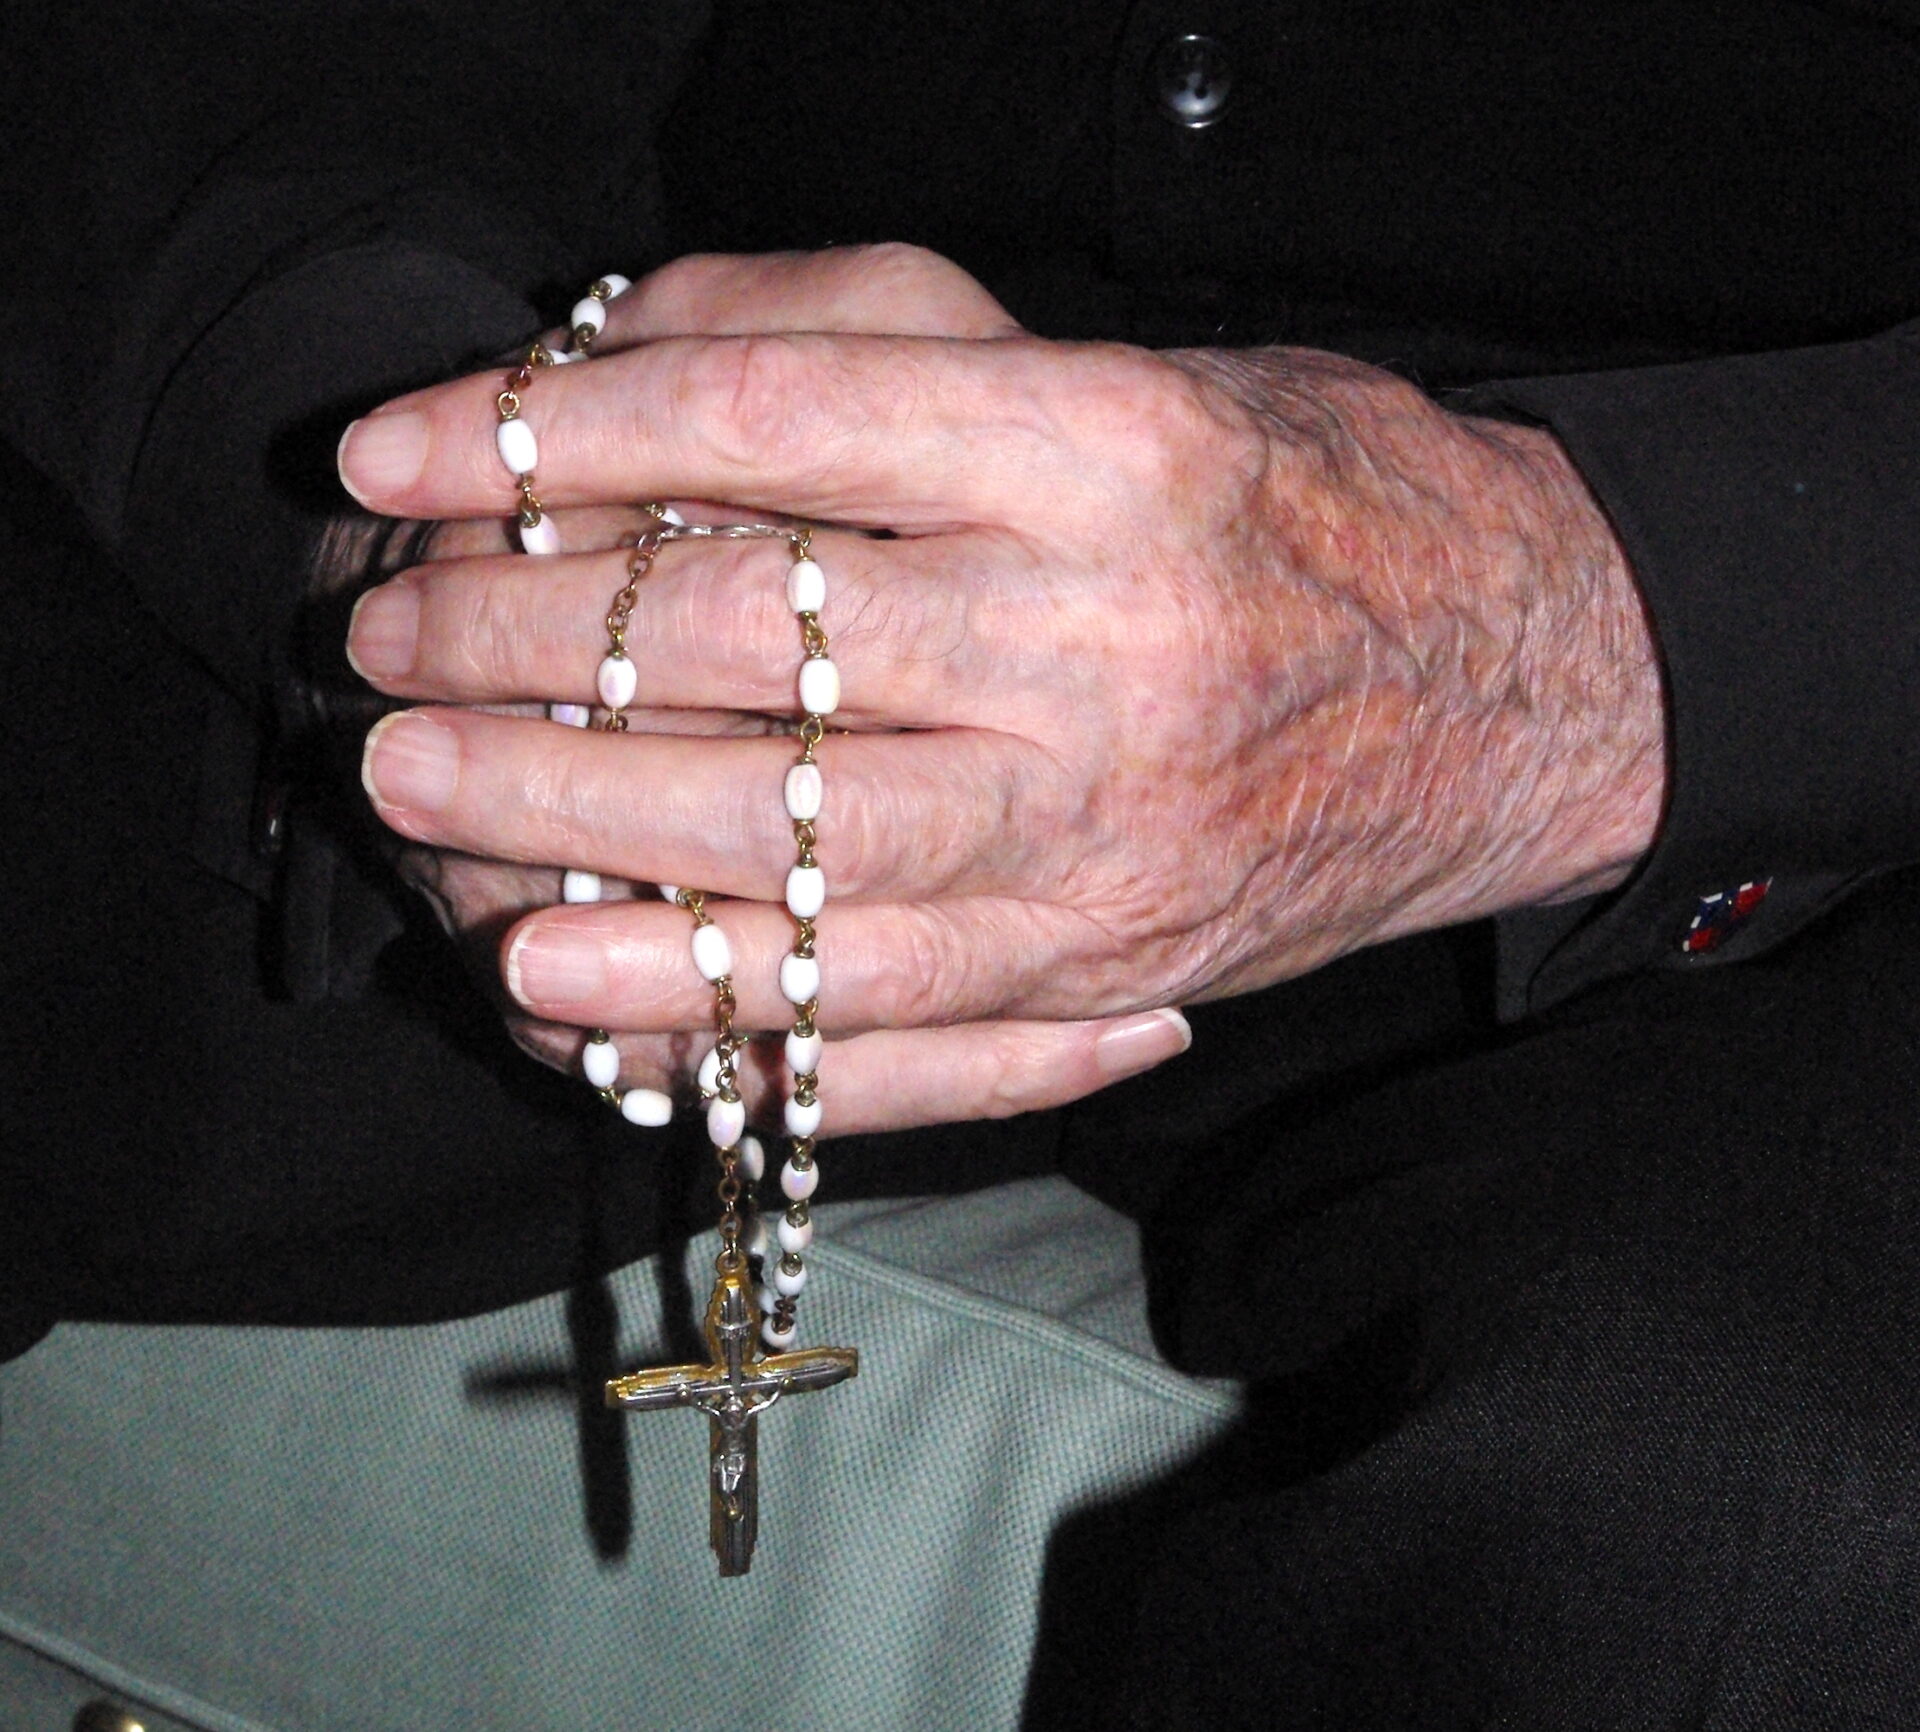 Londres St Peter'sPraying rosary hands